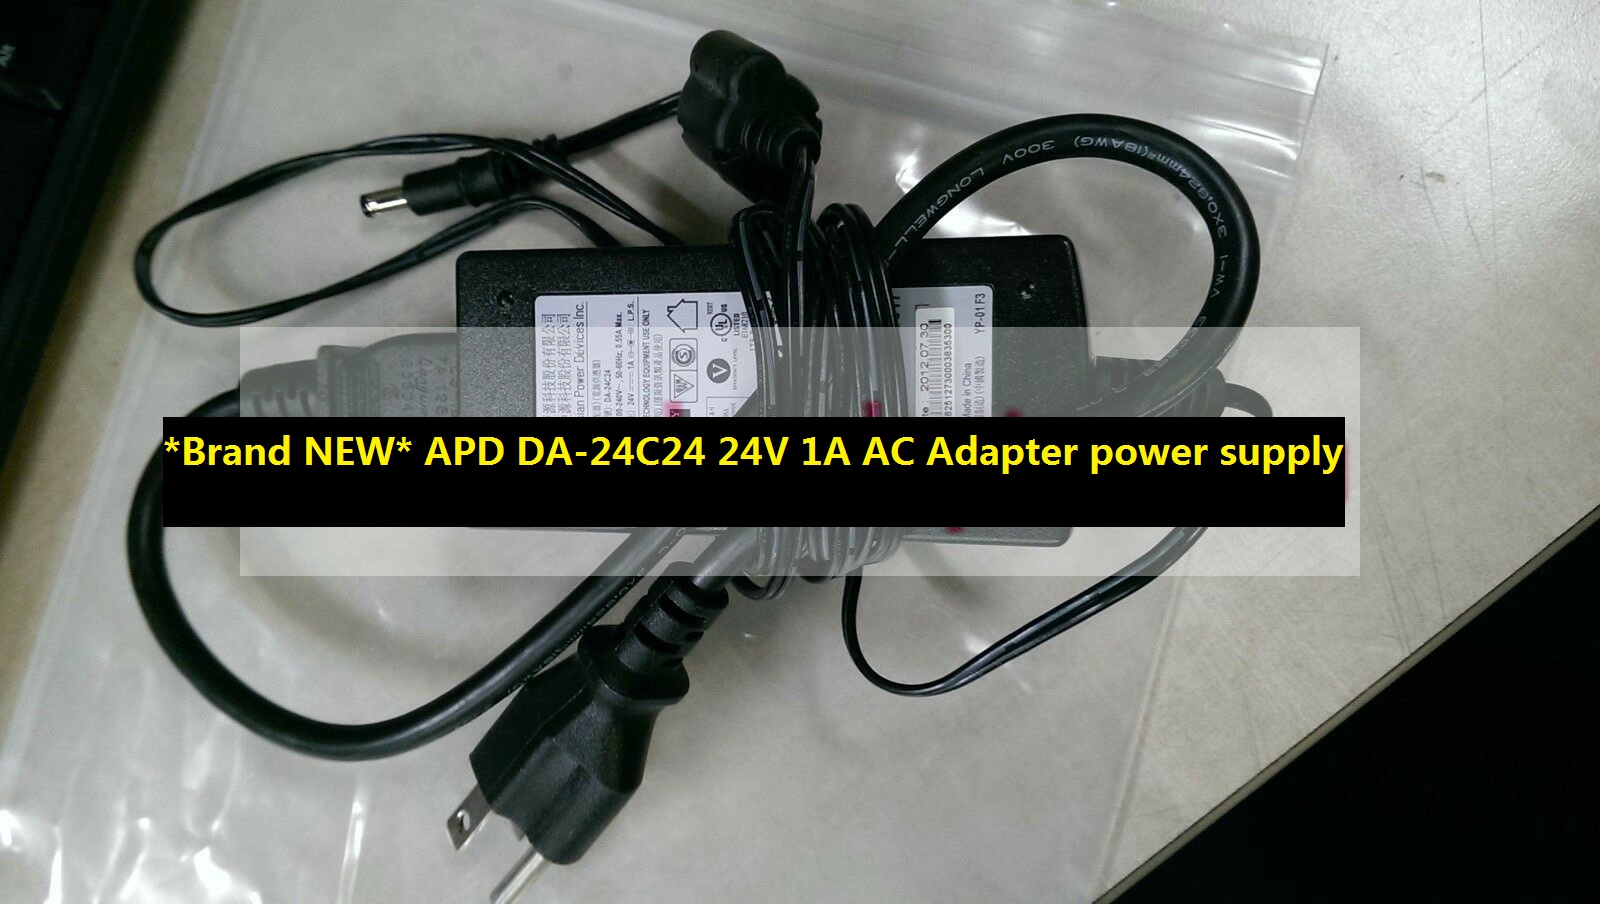 *Brand NEW* APD DA-24C24 24V 1A AC Adapter & Charger power supply